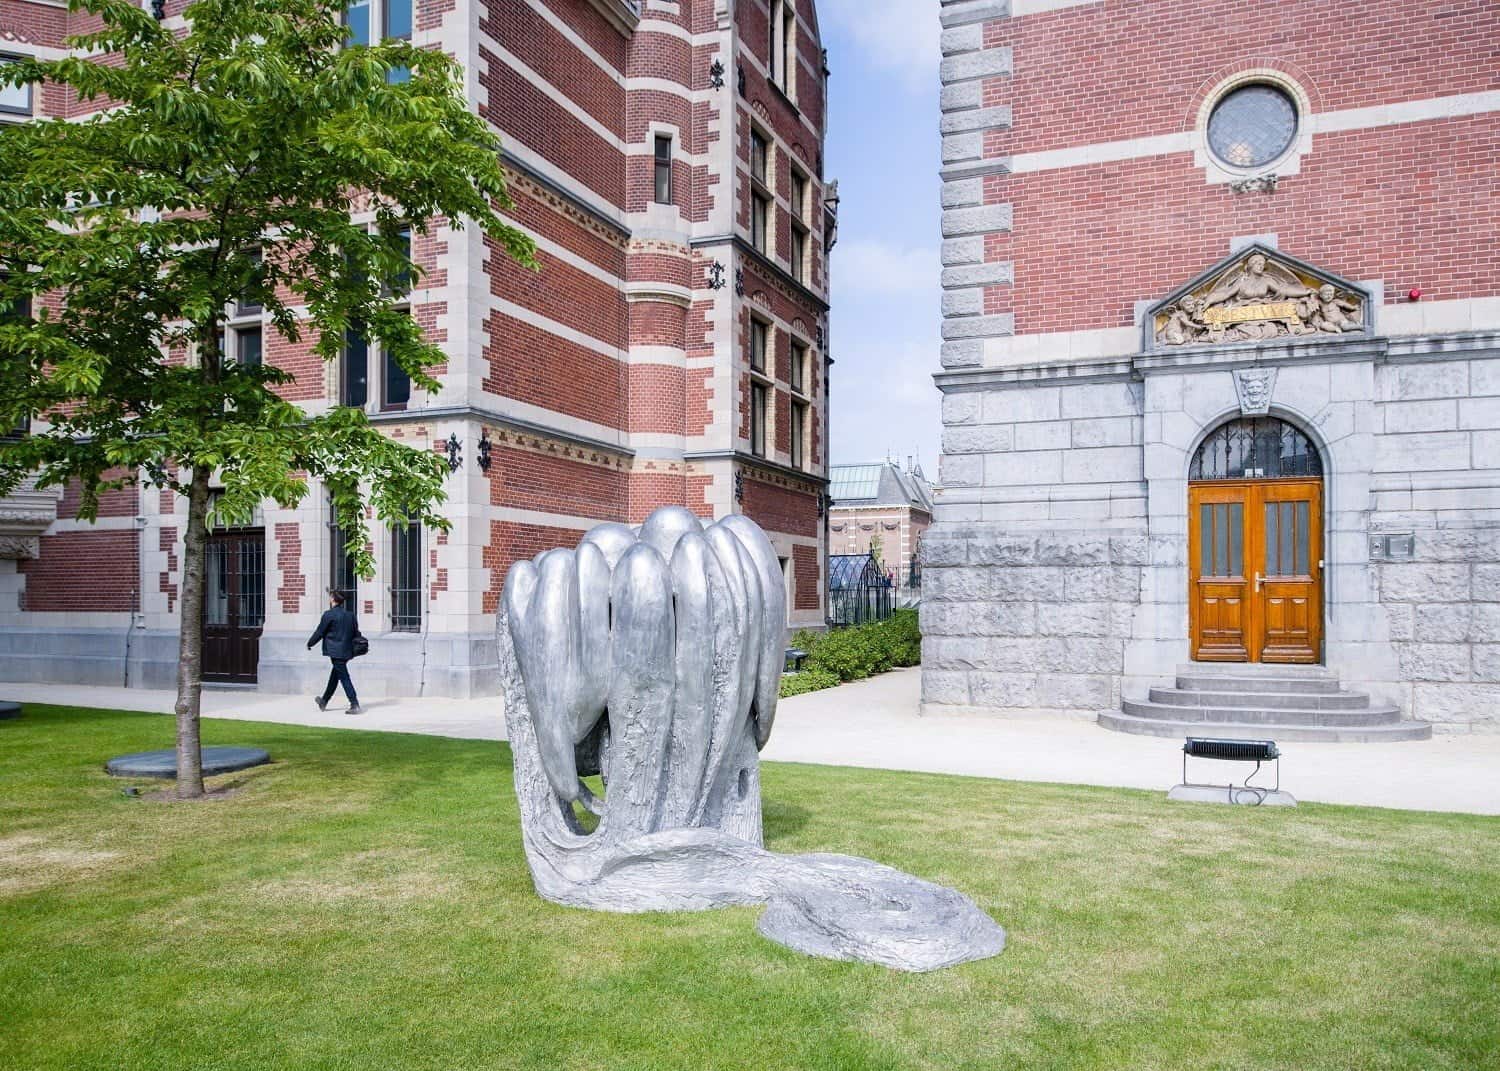 Louise Bourgeois 'In and out #2' 1995-1996, Easton Foundation. Foto: Antoine van Kaam © The Easton Foundation/Pictoright, Amsterdam